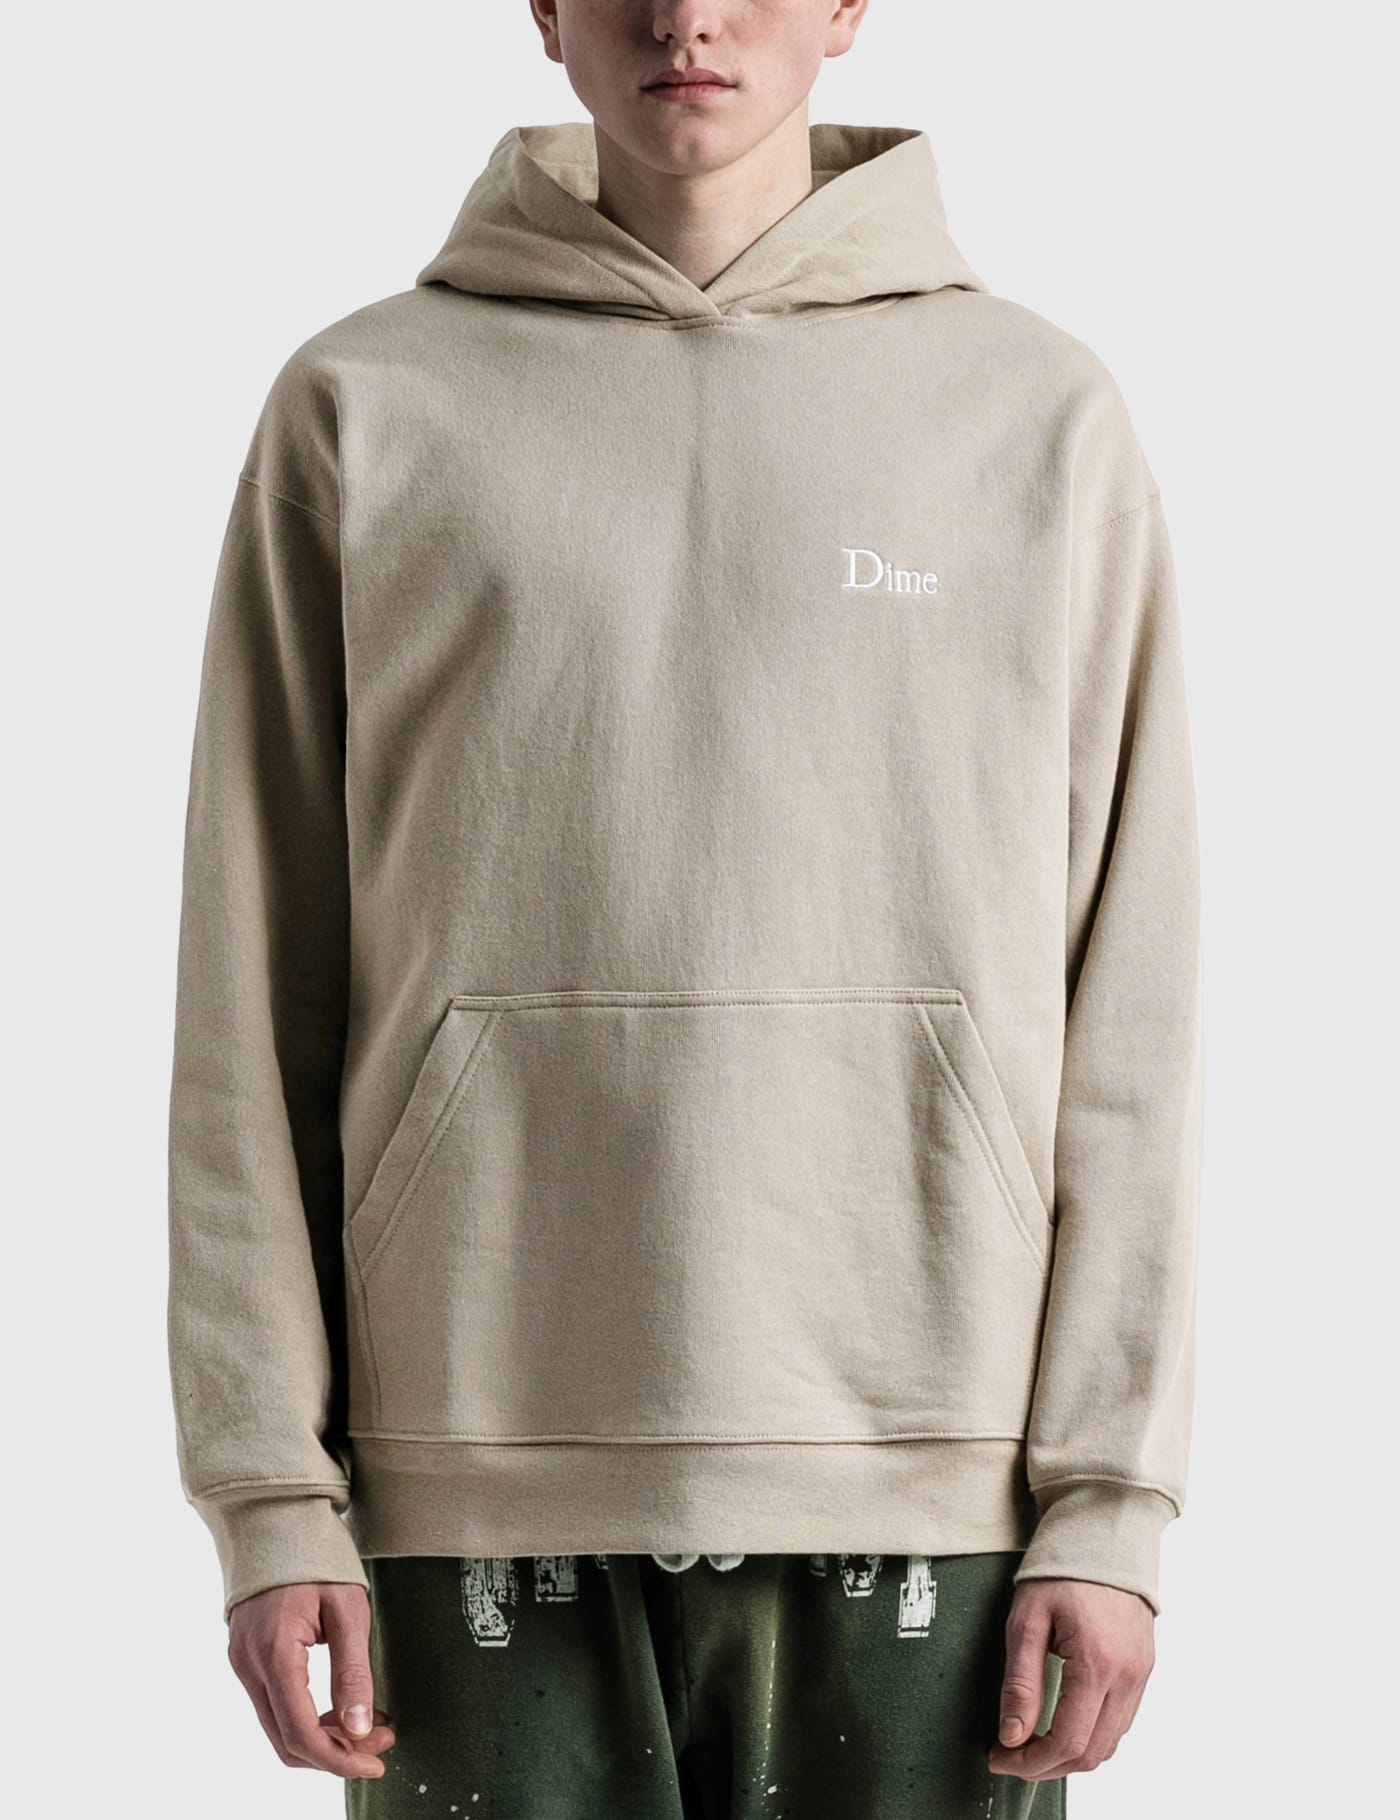 Dime - Classic Small Logo Hoodie | HBX - Globally Curated Fashion 